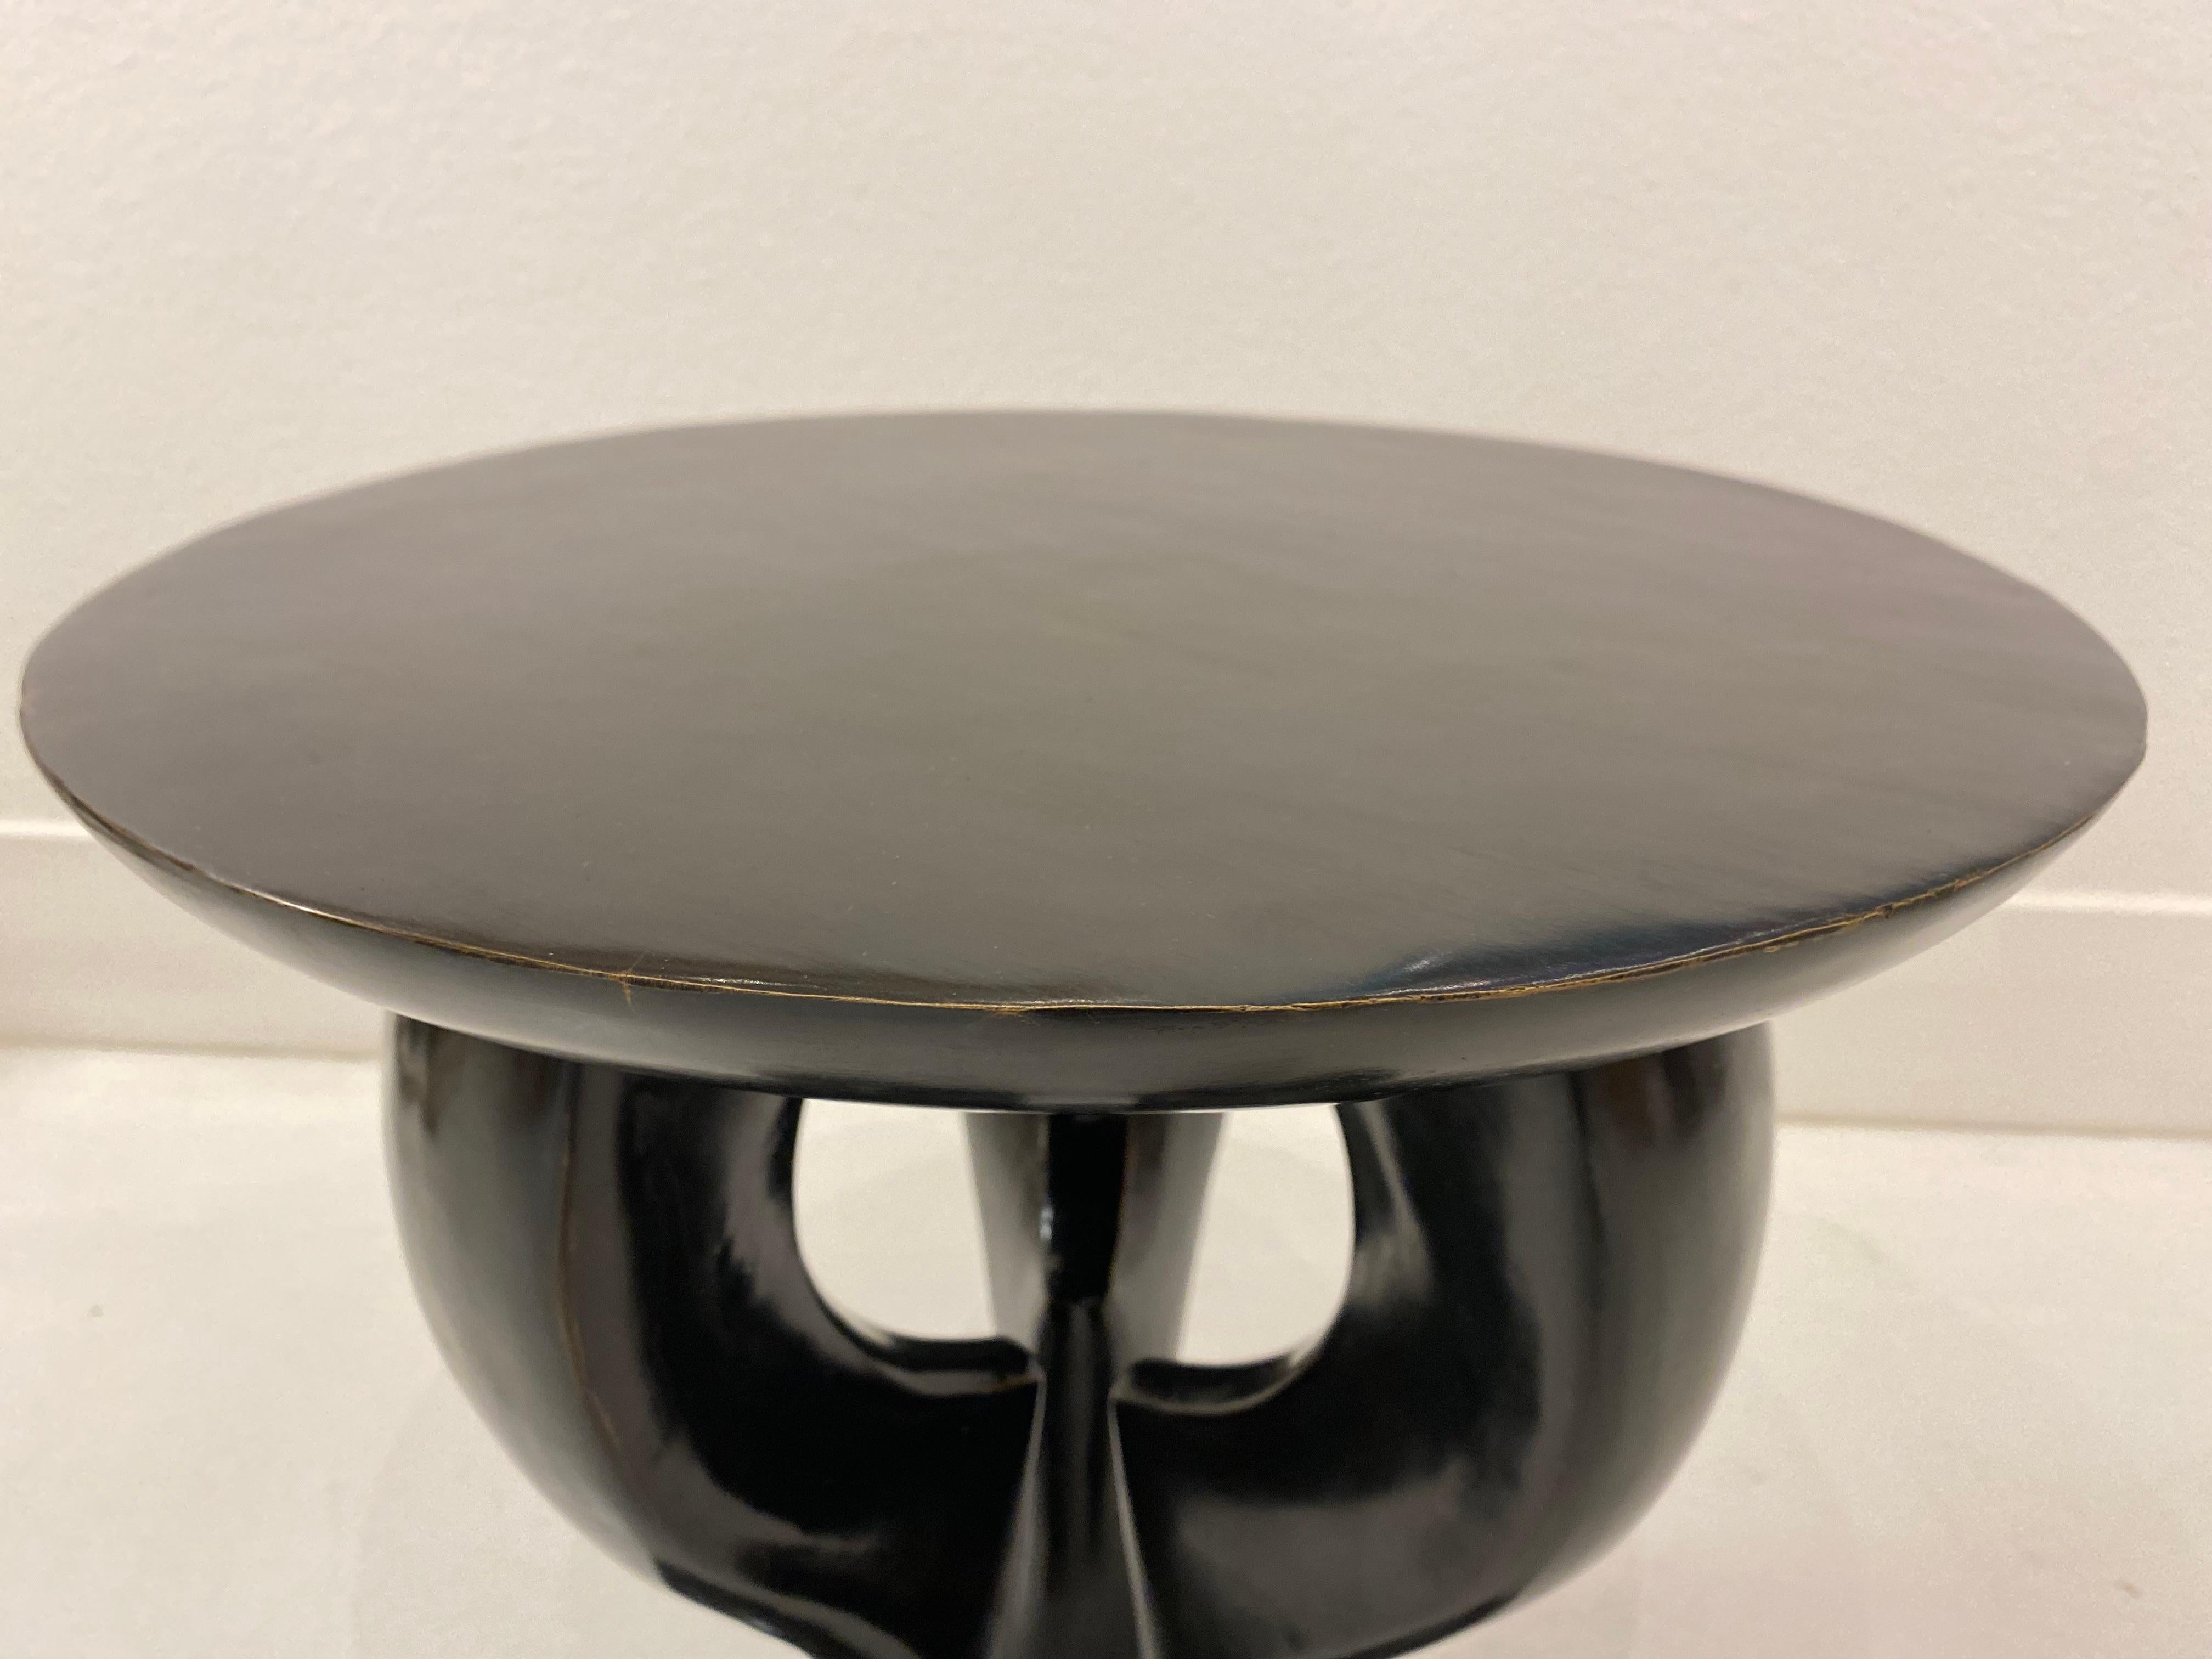 This is a striking rare bronze Le Lion Accent table by Jacques Garcia for Baker Furniture Co. Resin and black lacquer Le Lion's are easier to come by than this cast bronze example. The round top is surrounded by a curved apron and supported by 3